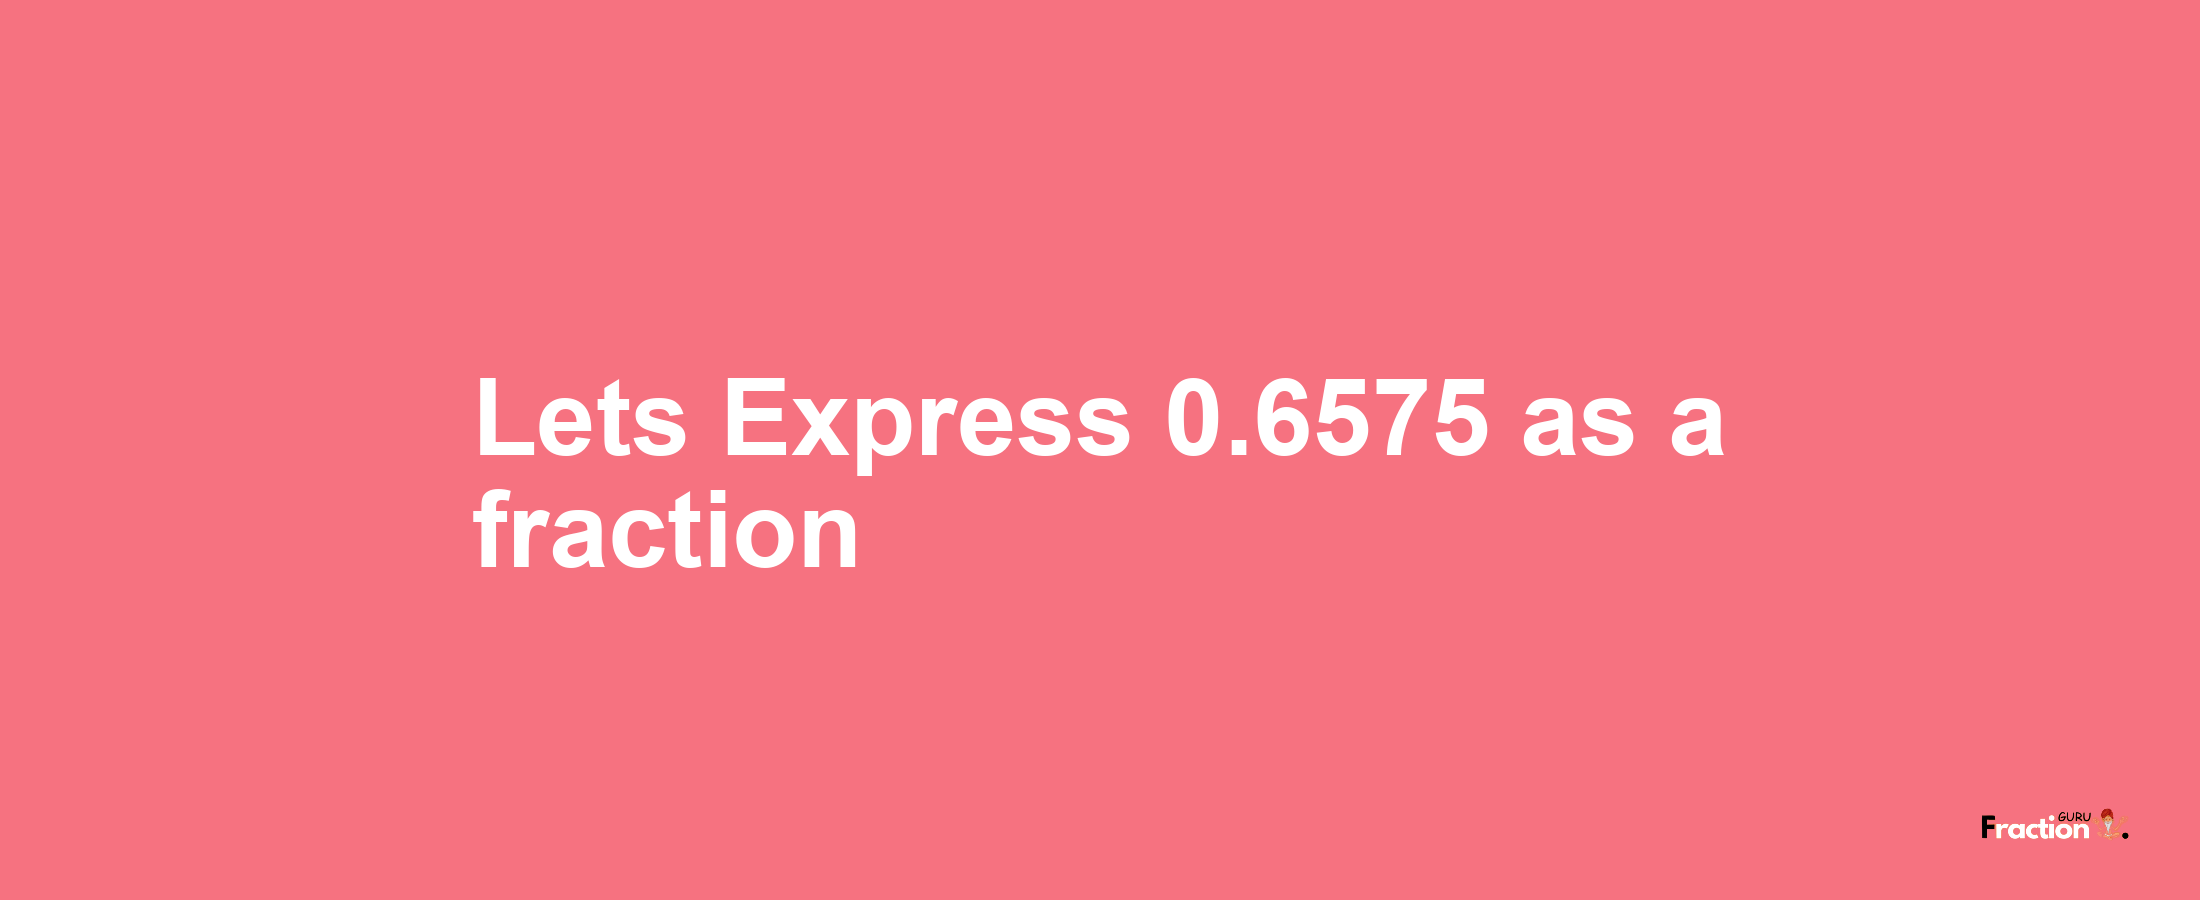 Lets Express 0.6575 as afraction